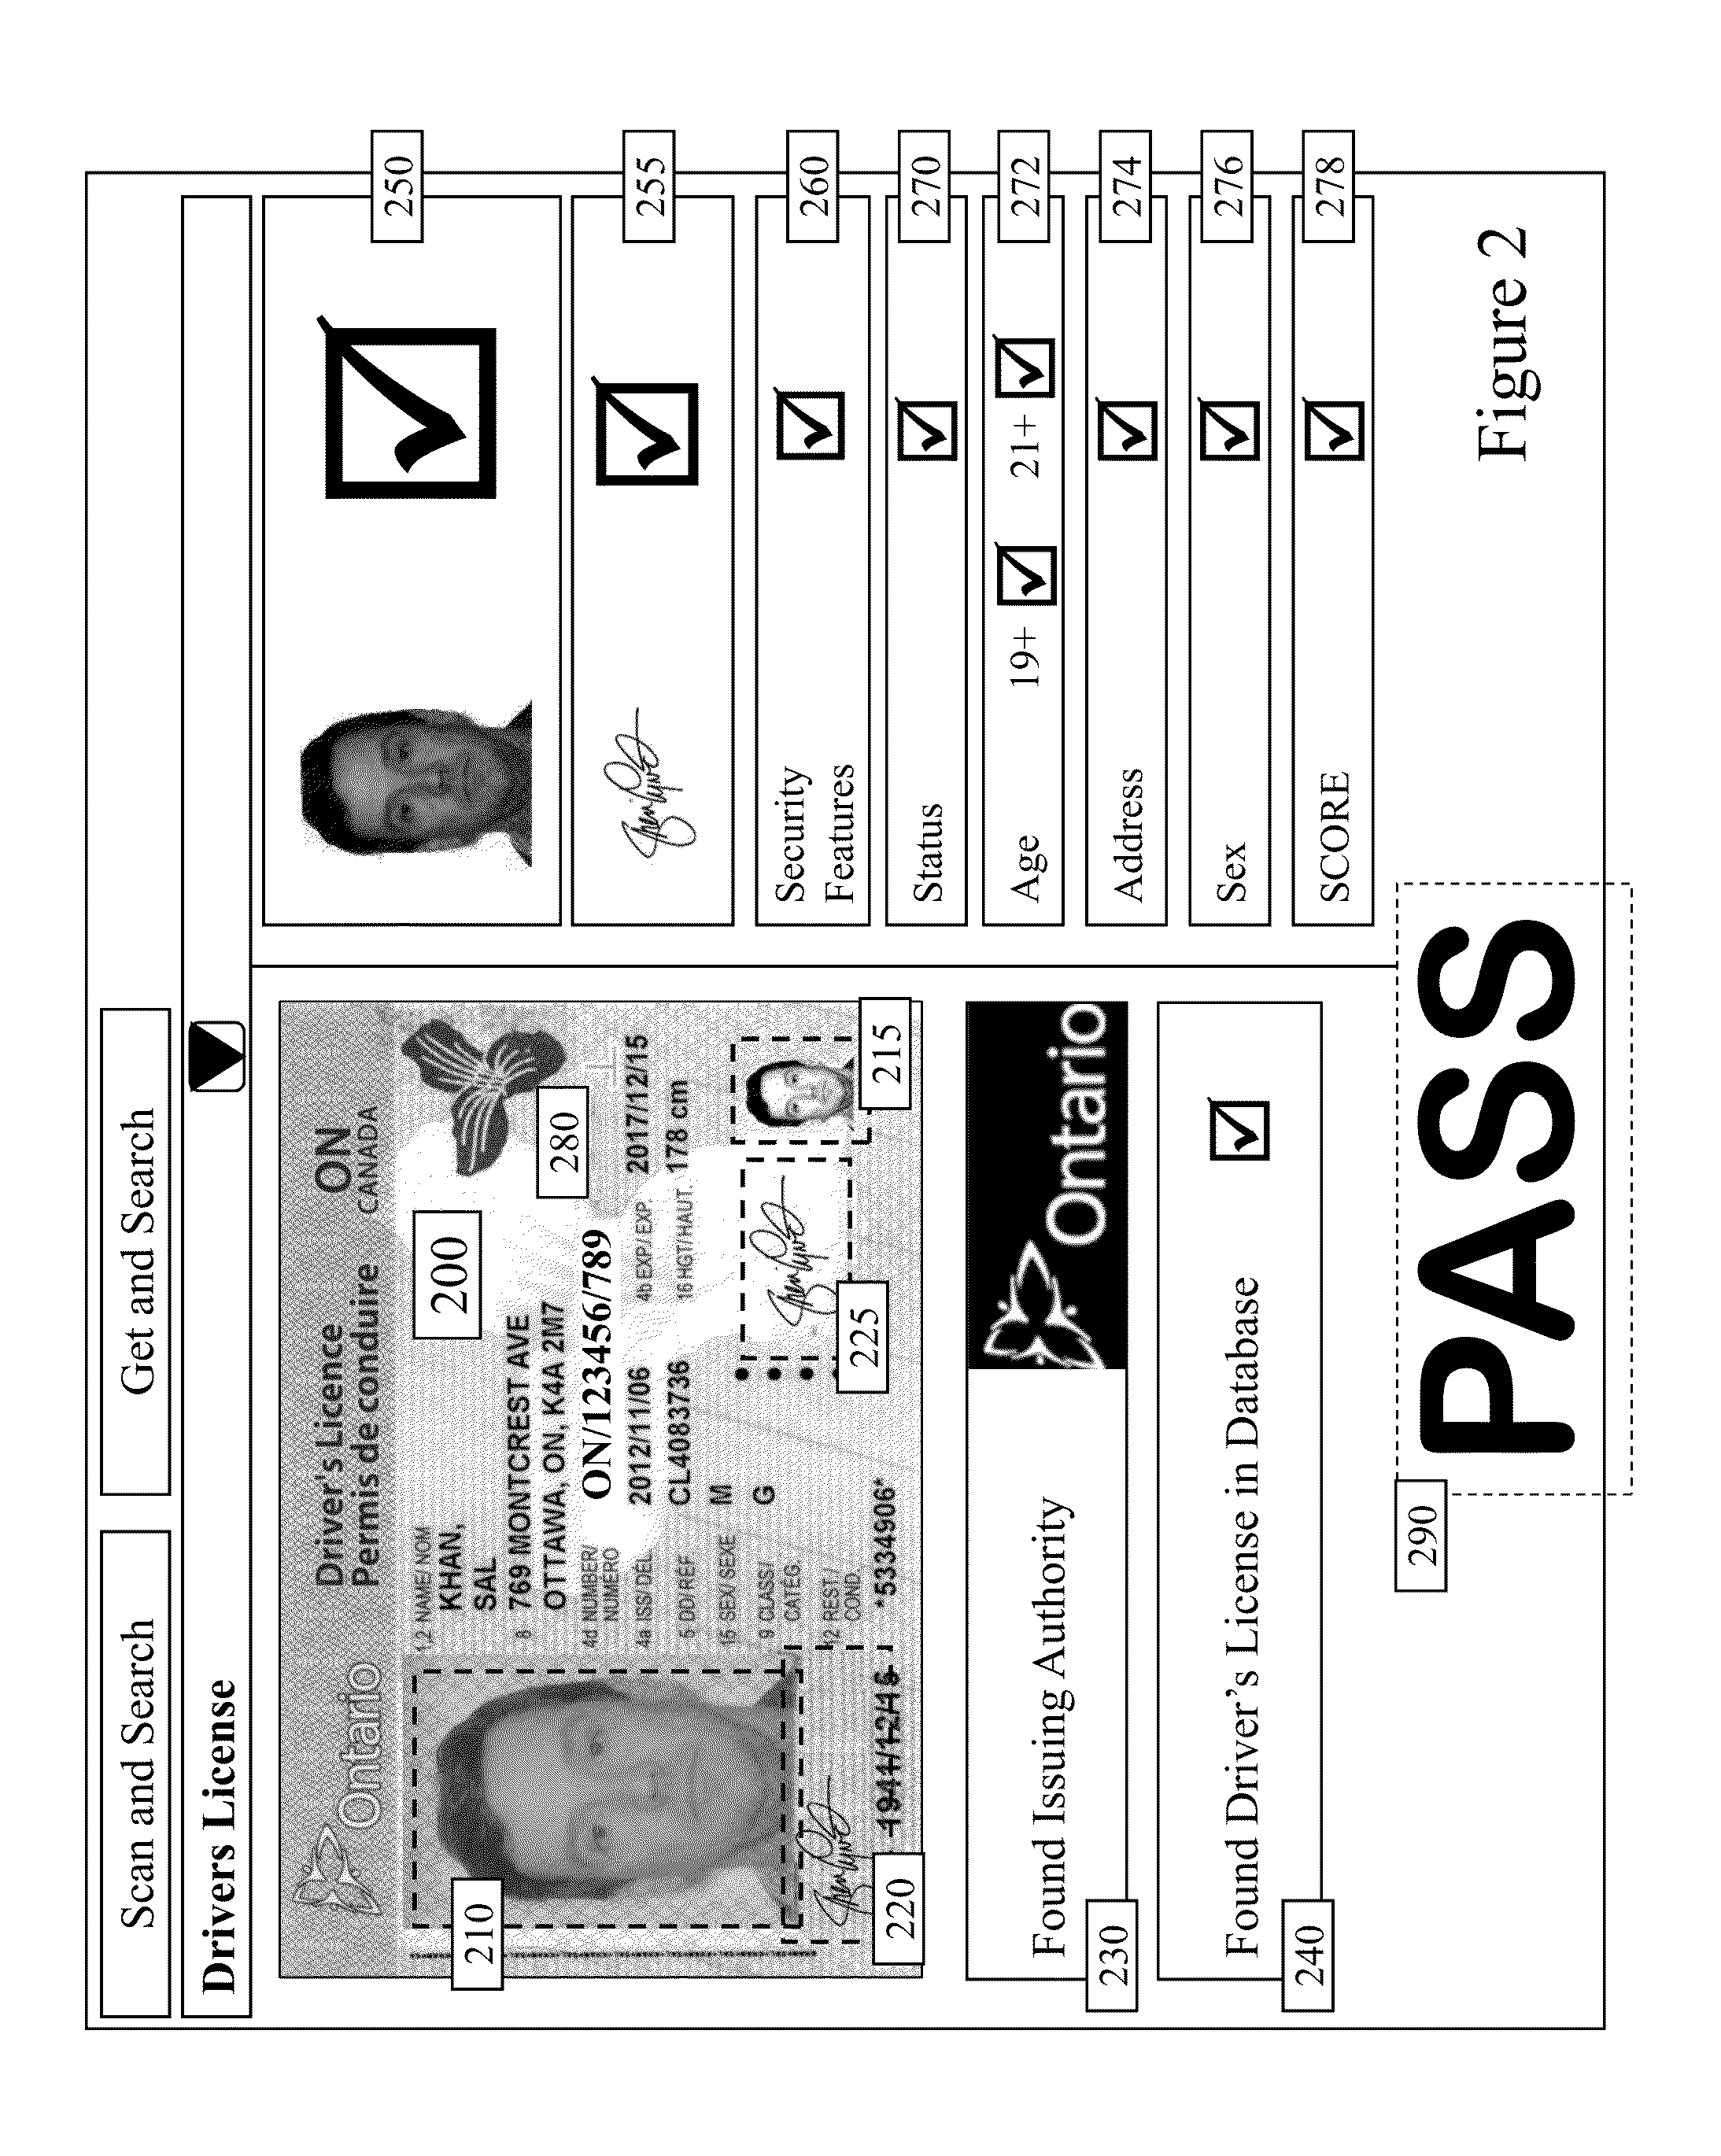 Systems and methods relating to the authenticity and verification of photographic identity documents